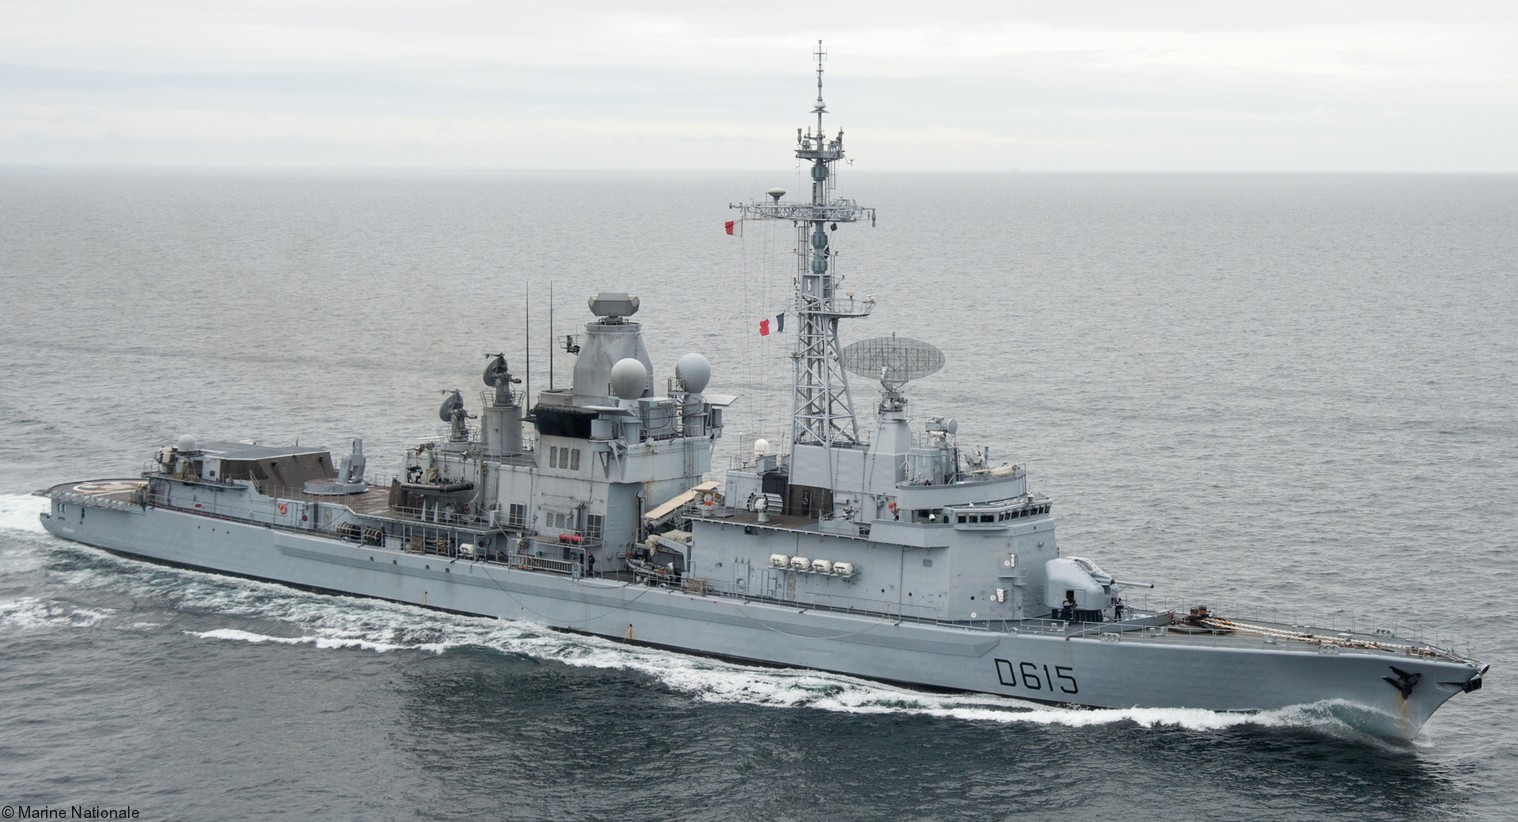 d-615 fs jean bart cassard f70aa class guided missile frigate ffgh ddg french navy marine nationale 28